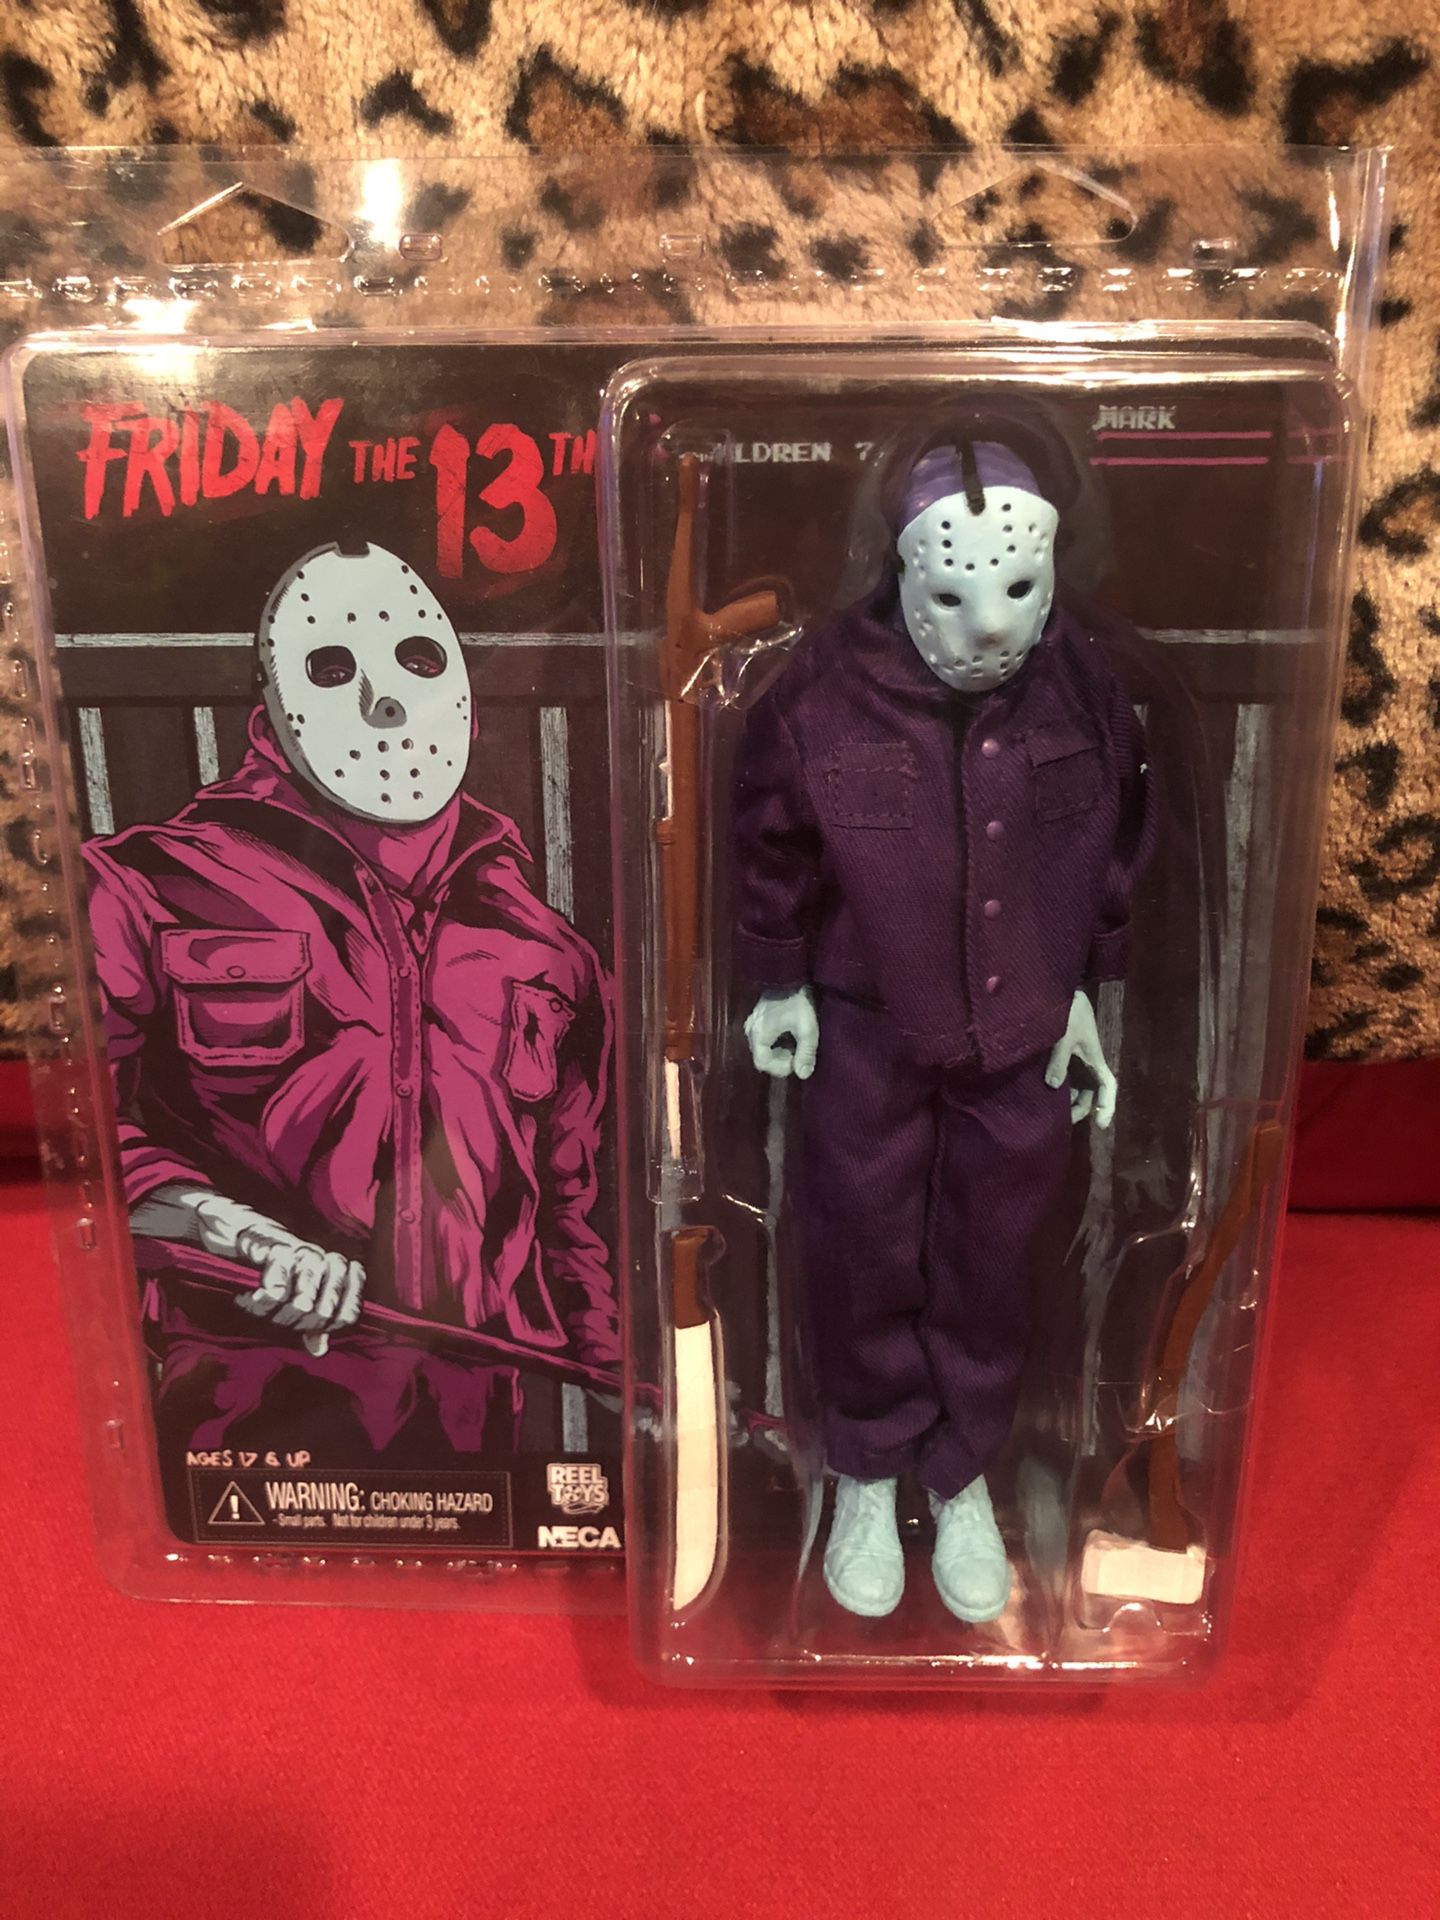 NECA REEL TOYS FRIDAY THE 13TH NES Version JASON Voorhees FIGURE  8 bit video game